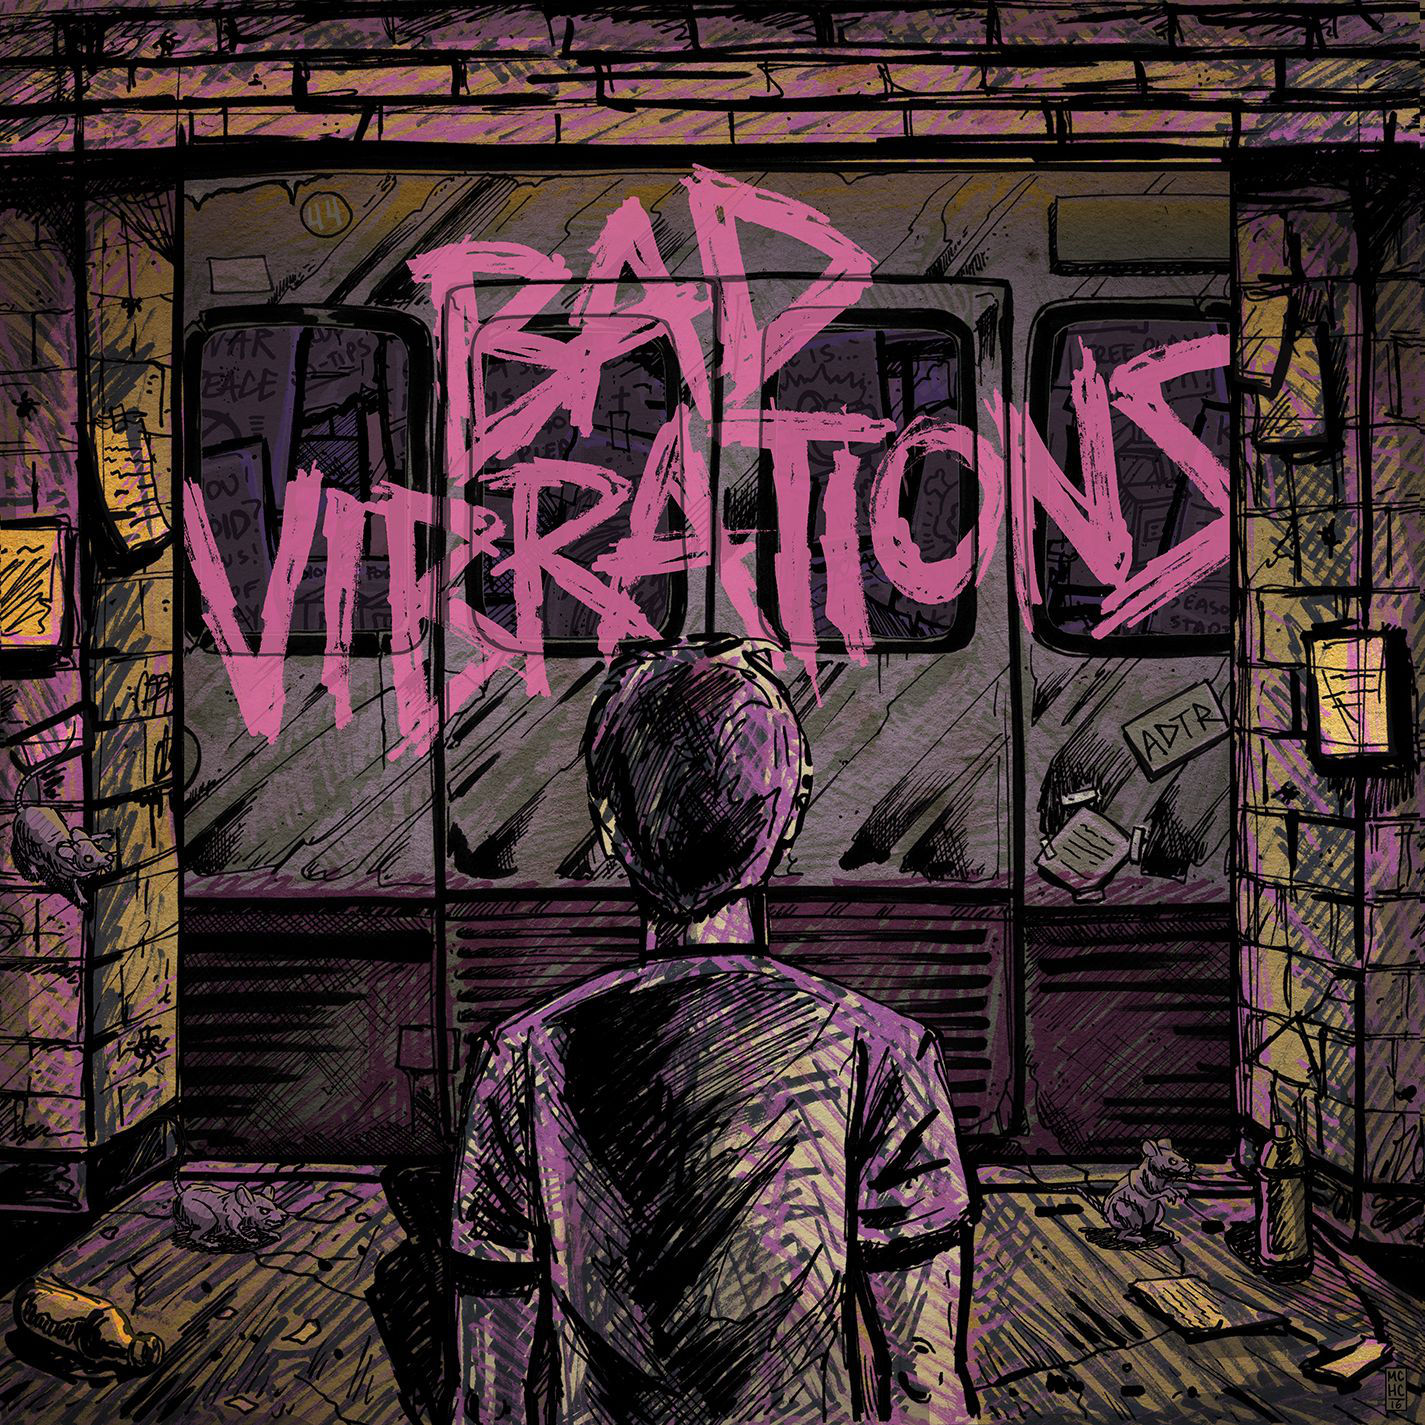 A Day To Remember - Bad Vibrations {Deluxe Edition} (2016) [HDTracks FLAC 24bit/44,1kHz]